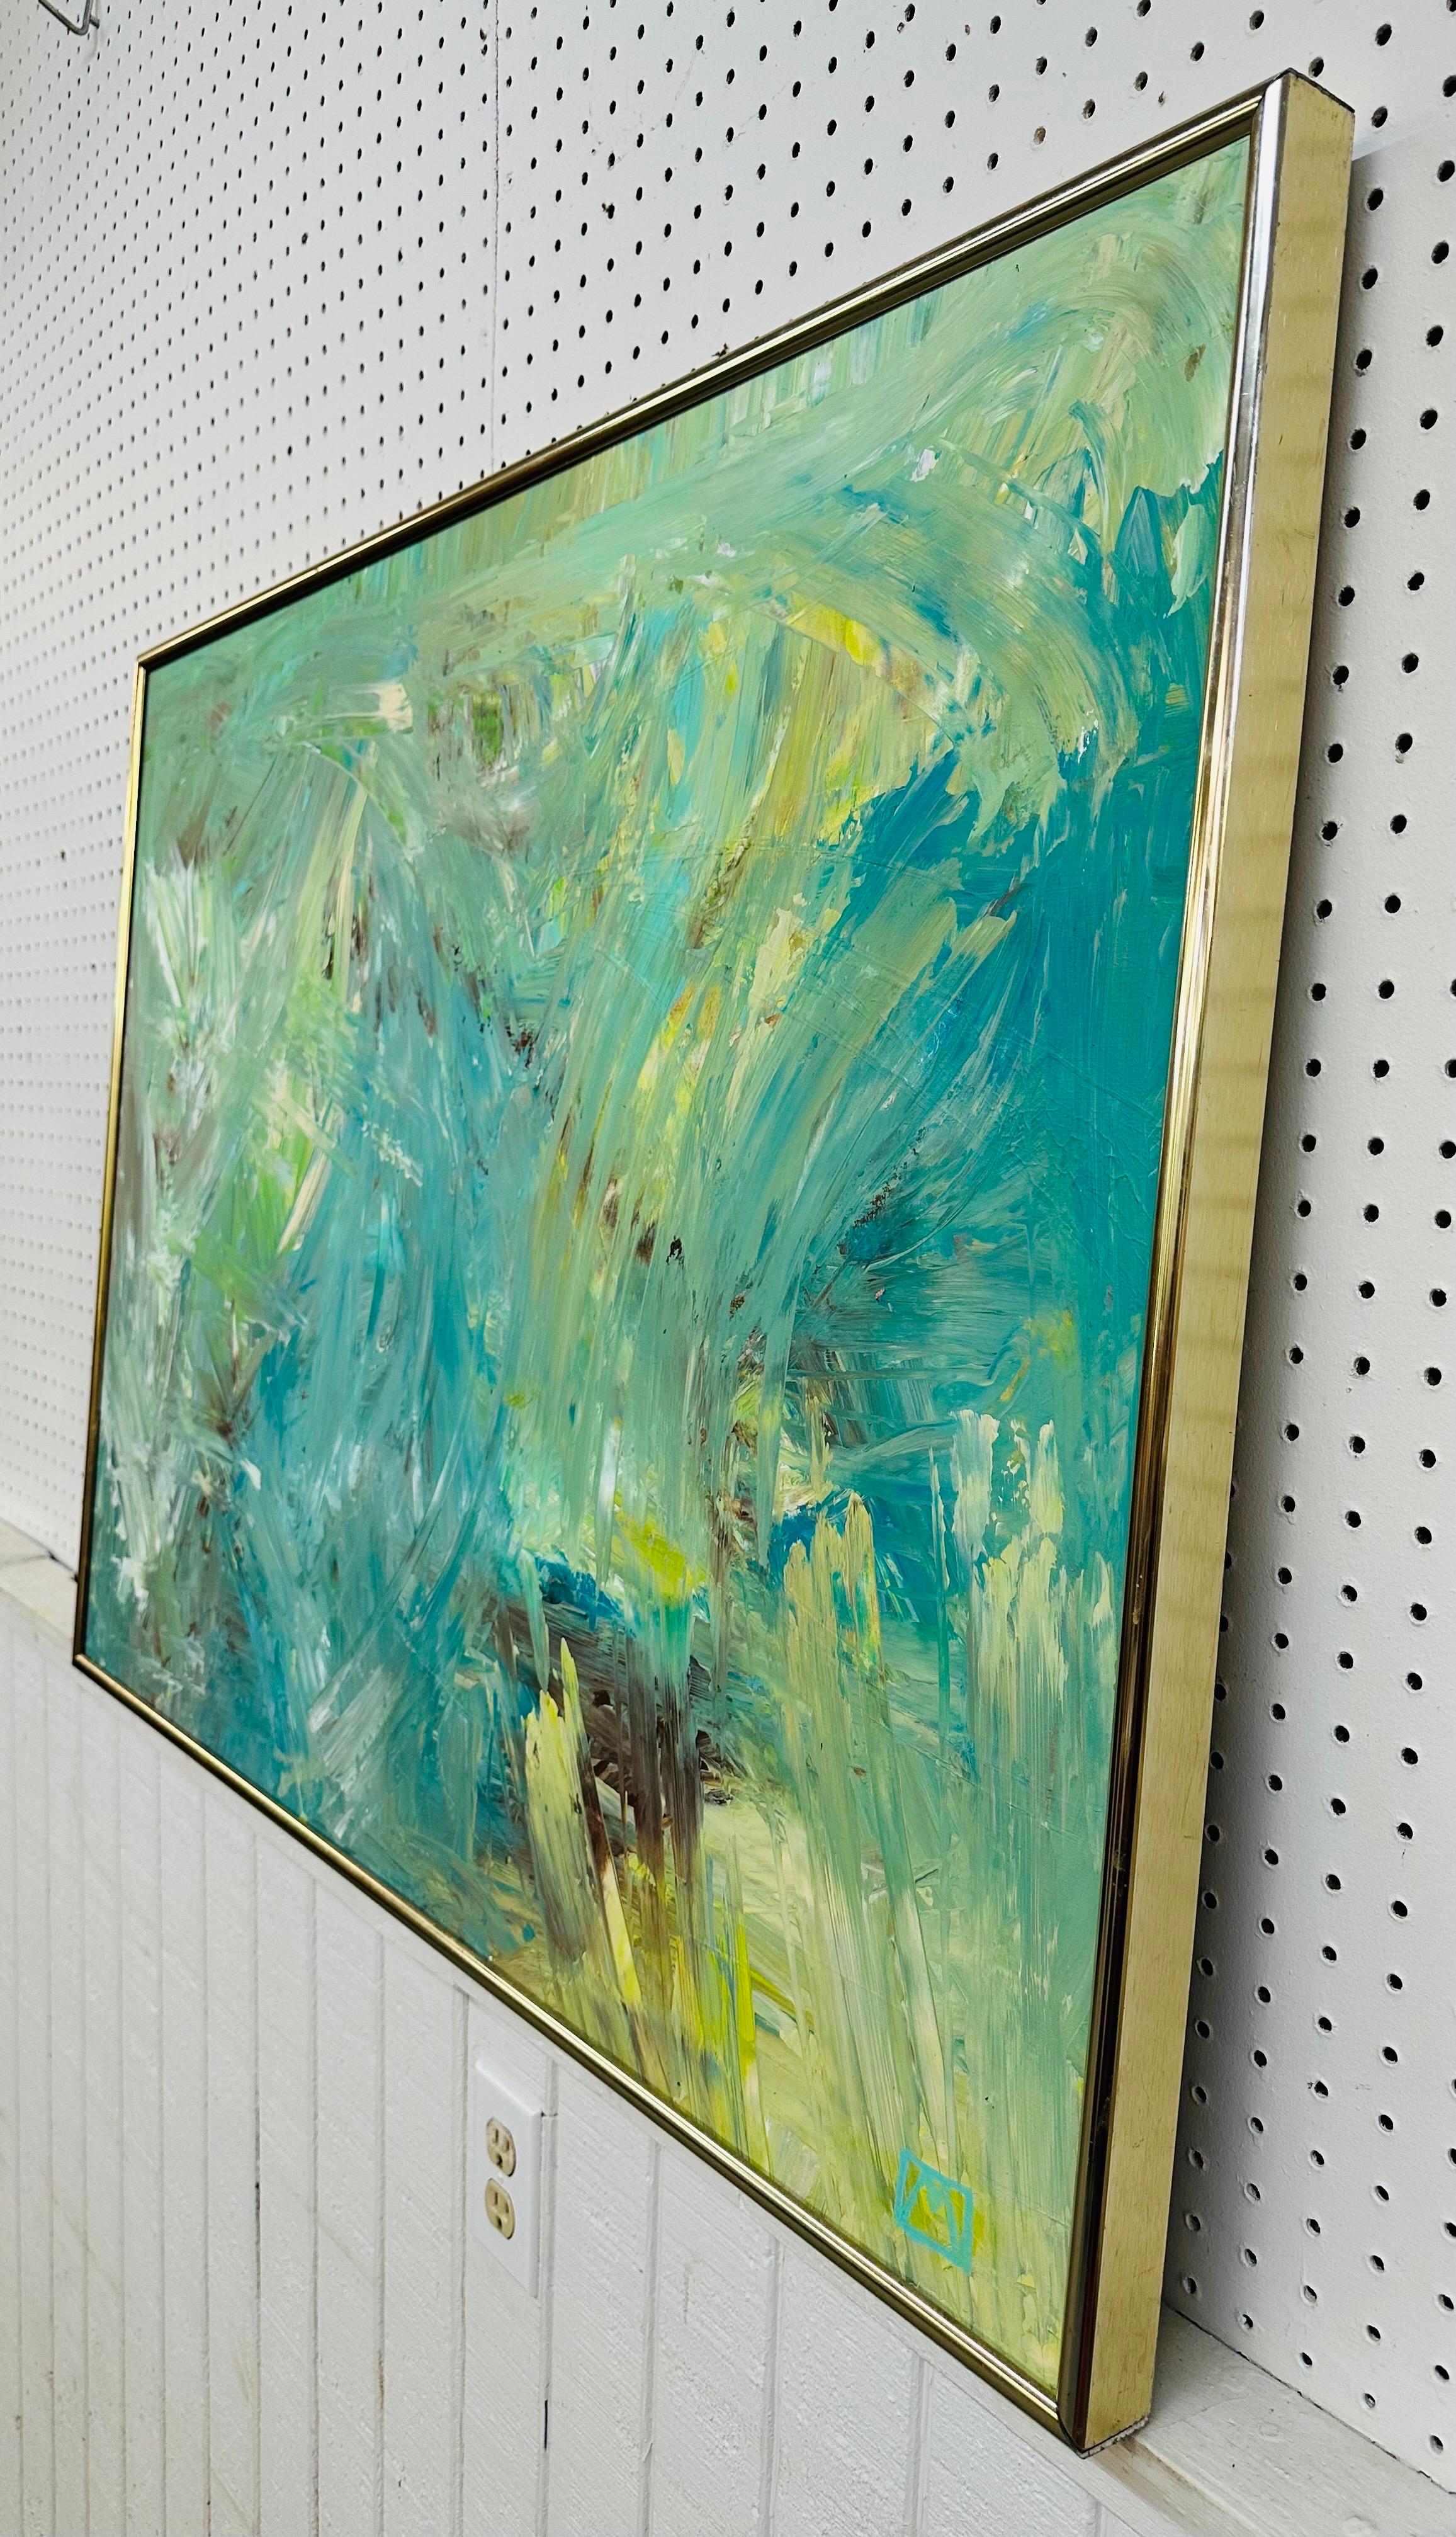 This listing is for a Modern Expressionist Abstract Painting. Featuring a vintage gold frame, original expressionist style abstract art with a mixture of colors, and a wire on the back for hanging. This is an exceptional piece by artist Mullin.